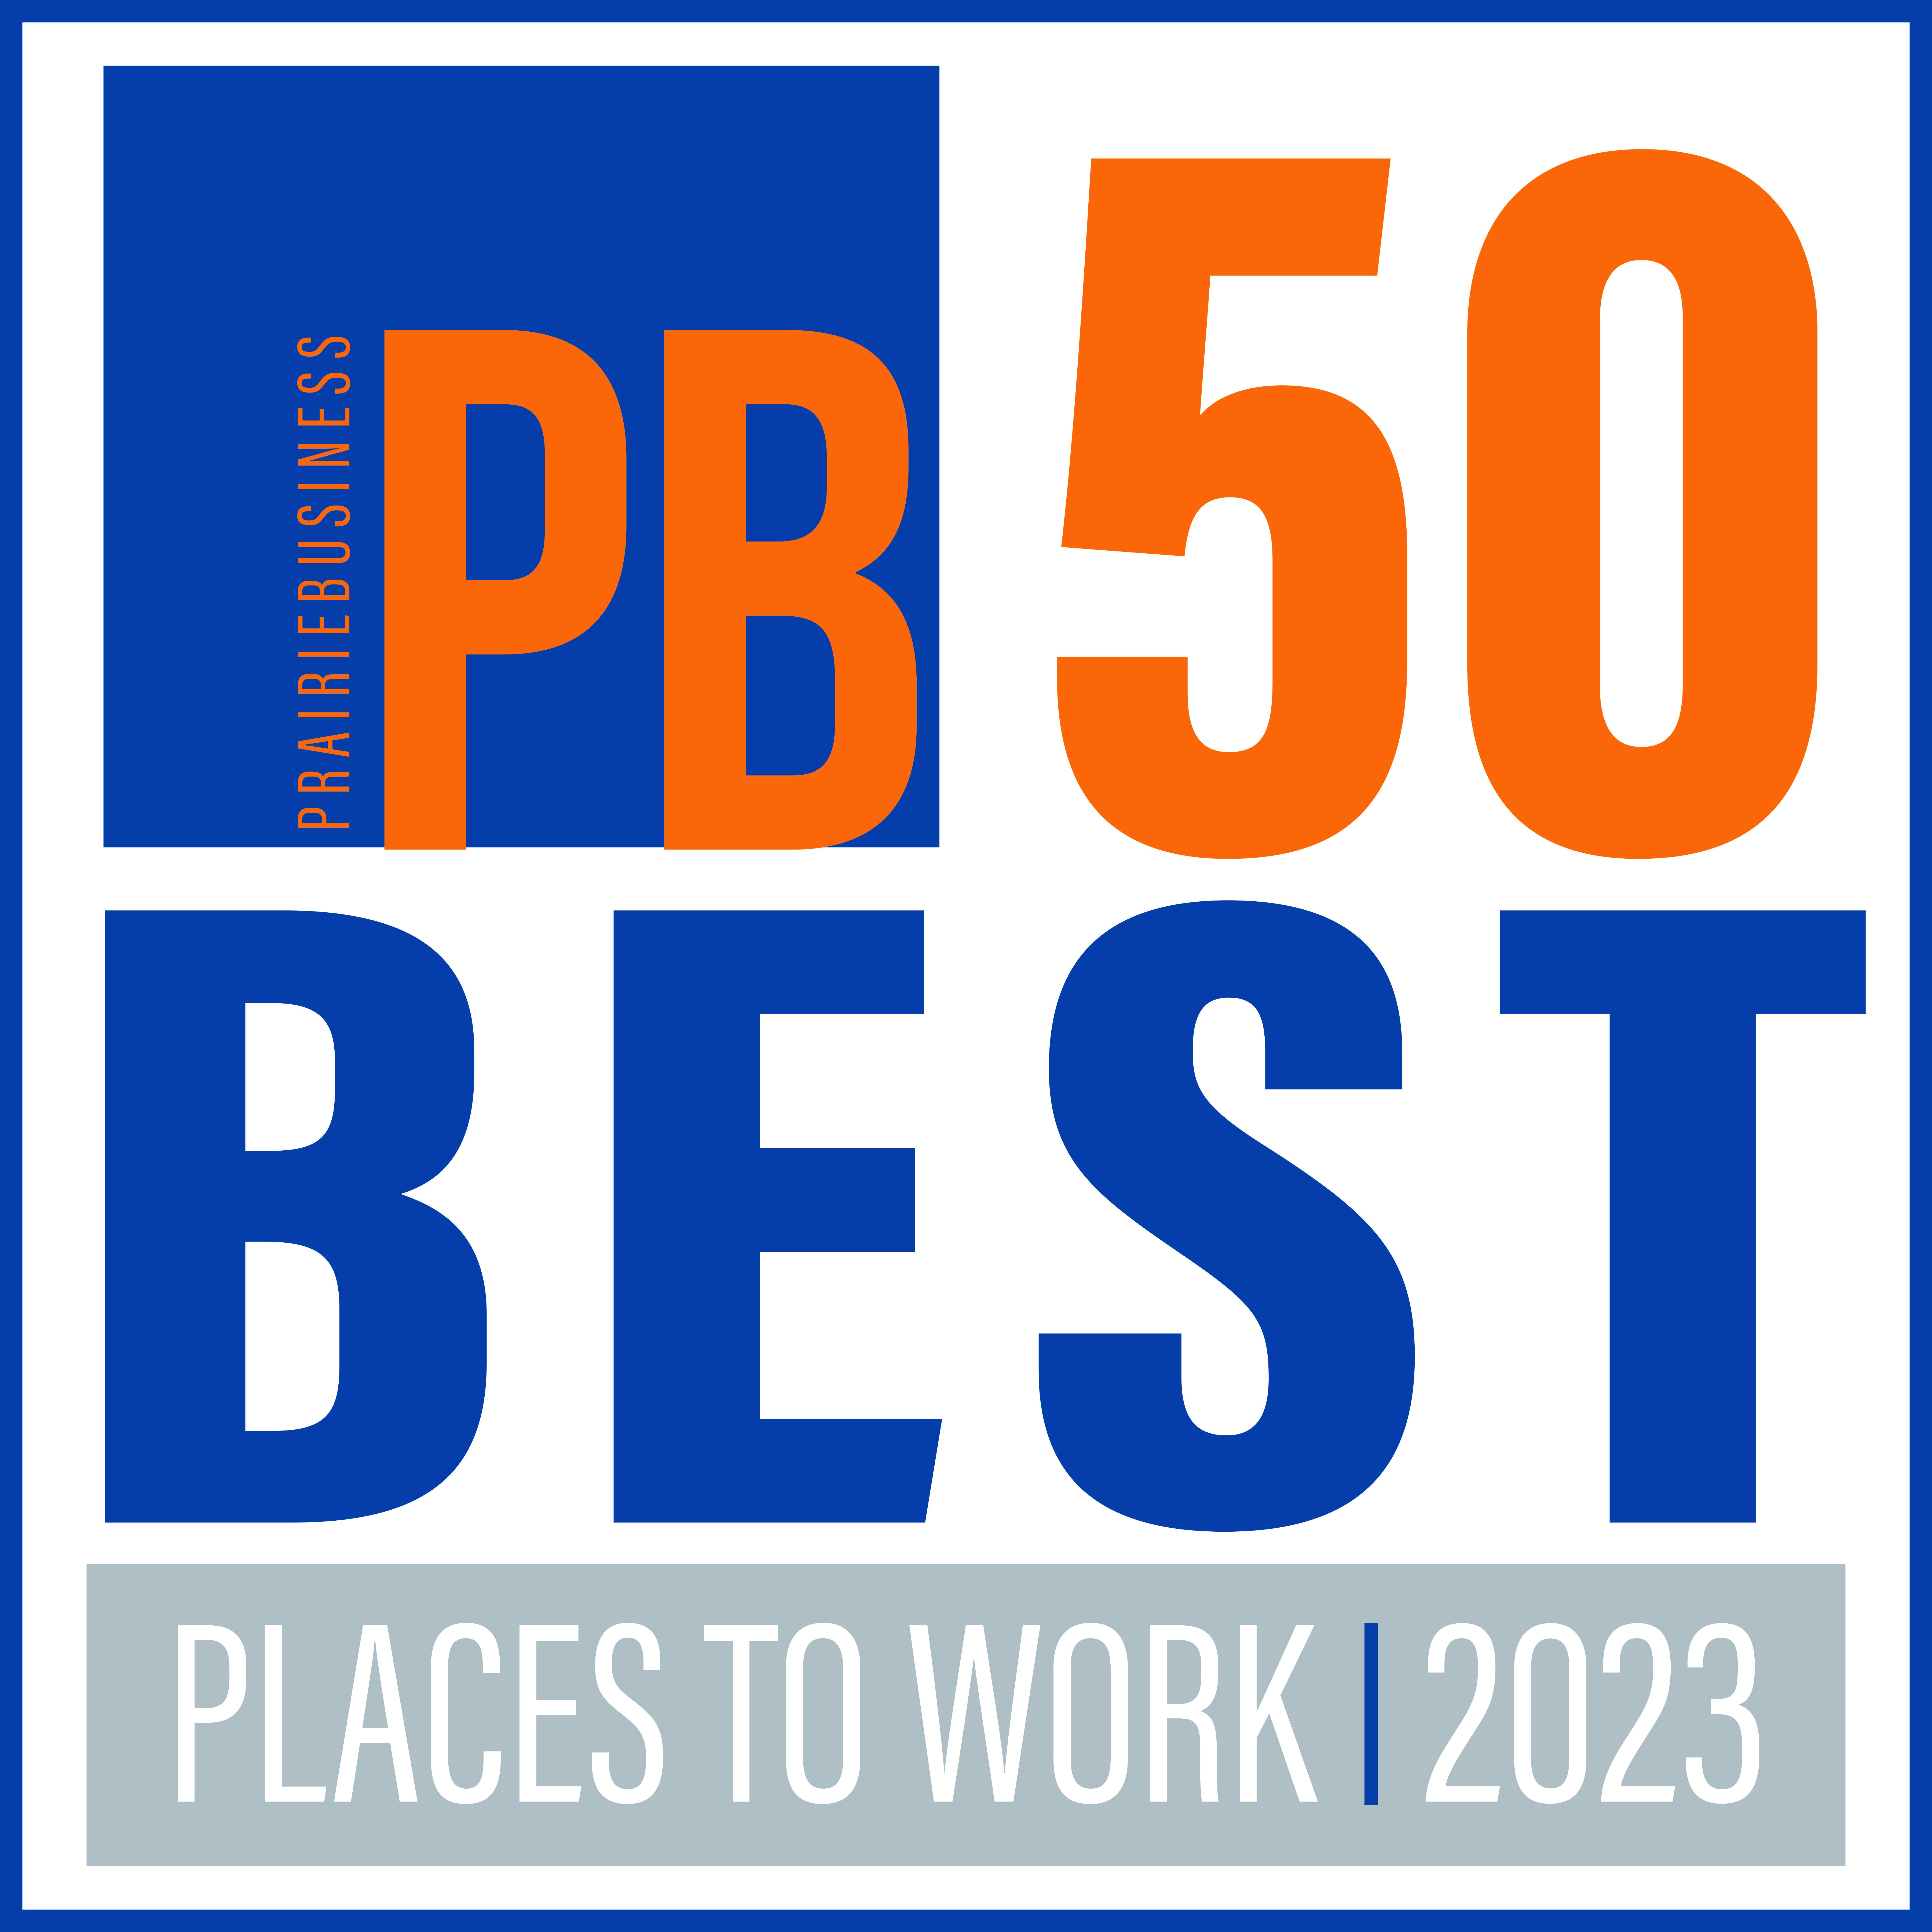 Architecture Incorporated Named One of the 50 Best Places to Work Five Years in a Row